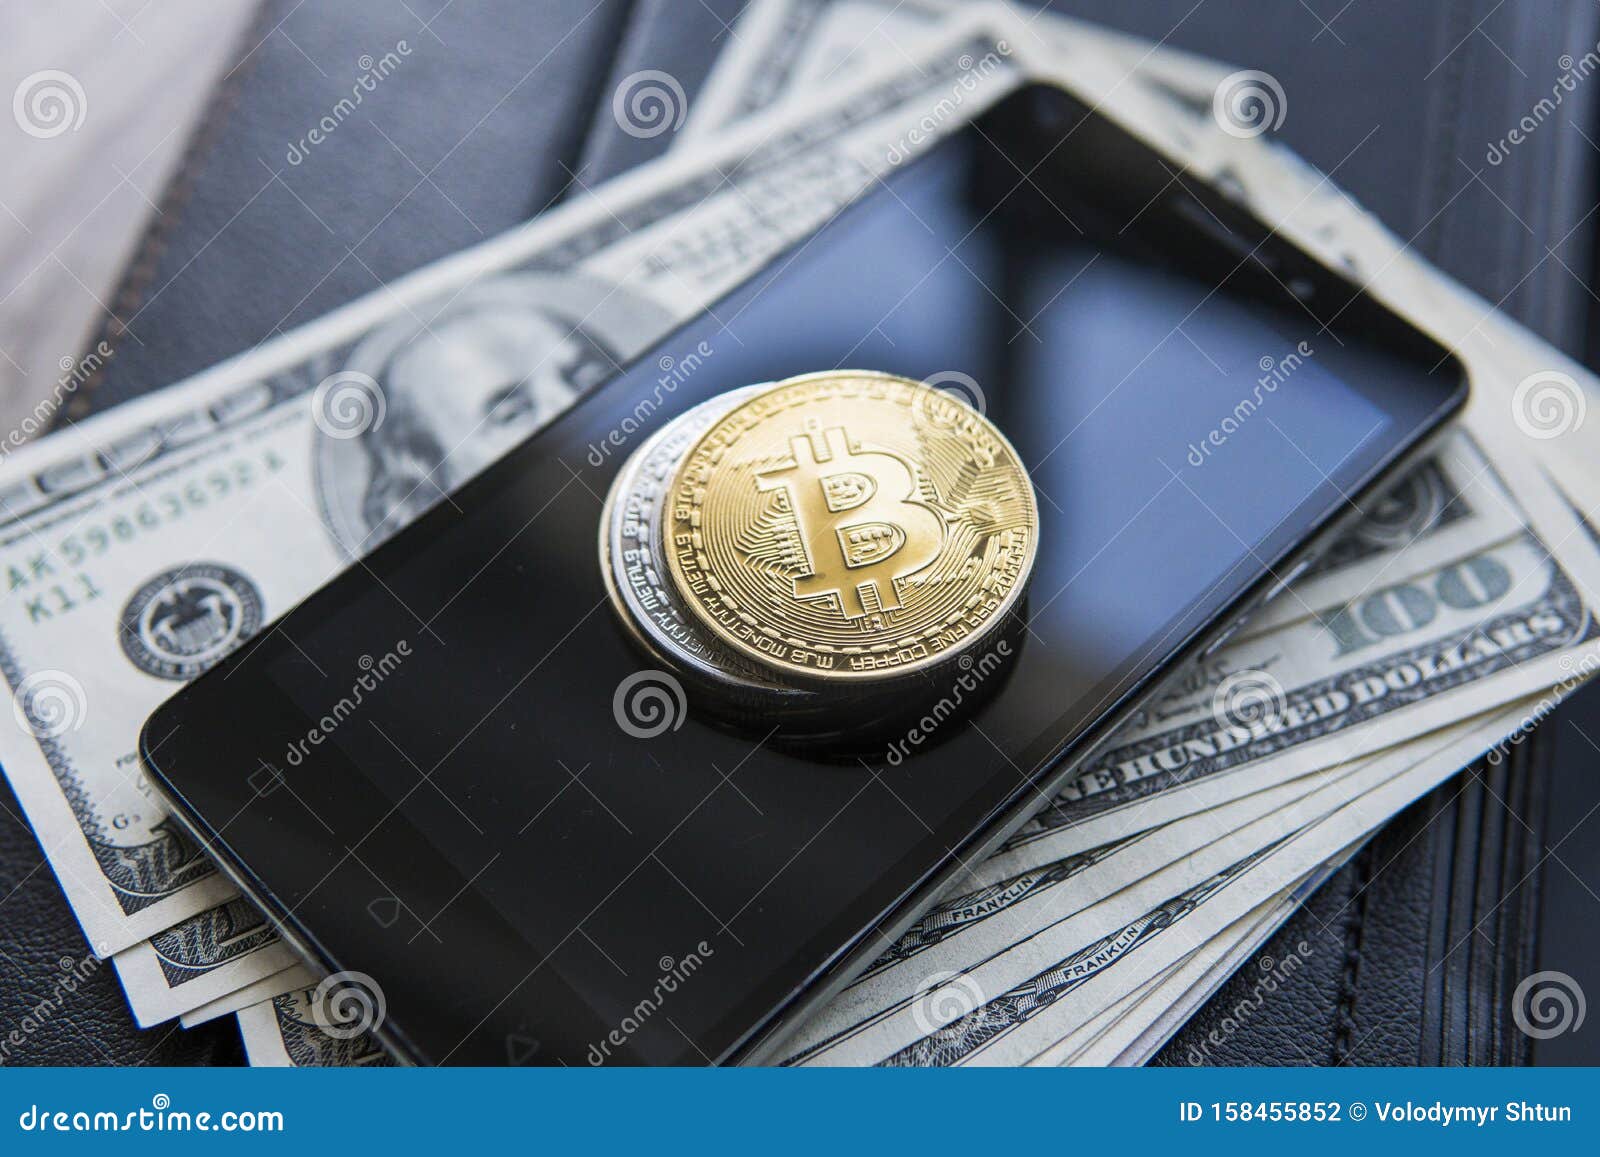 Golden Bitcoins On The Smart Phone And Us Dollars With ...